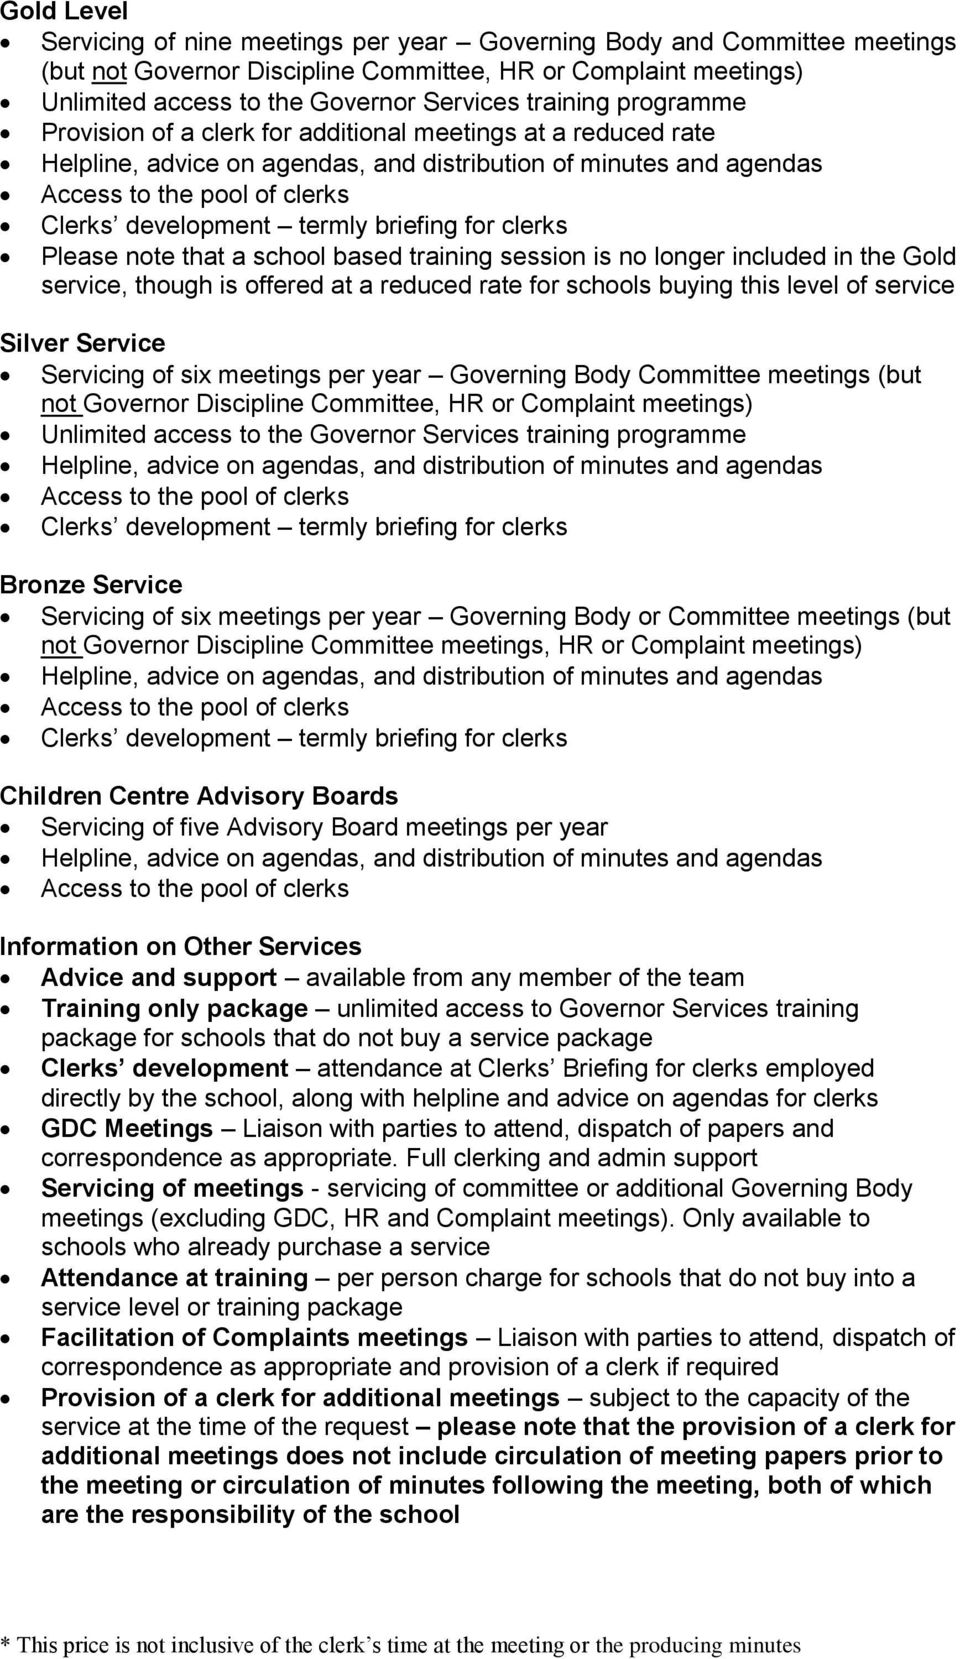 Servicing of six meetings per year Governing Body Committee meetings (but not Governor Discipline Committee, HR or Complaint meetings) Bronze Service Servicing of six meetings per year Governing Body